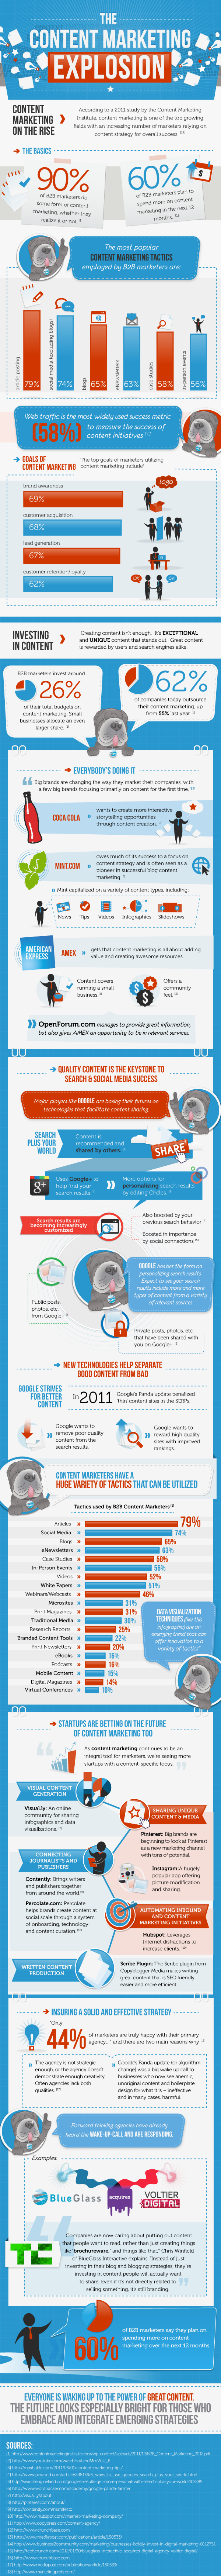 Content Marketing Explosion Infographic - Is Content Marketing Right For Your Business?